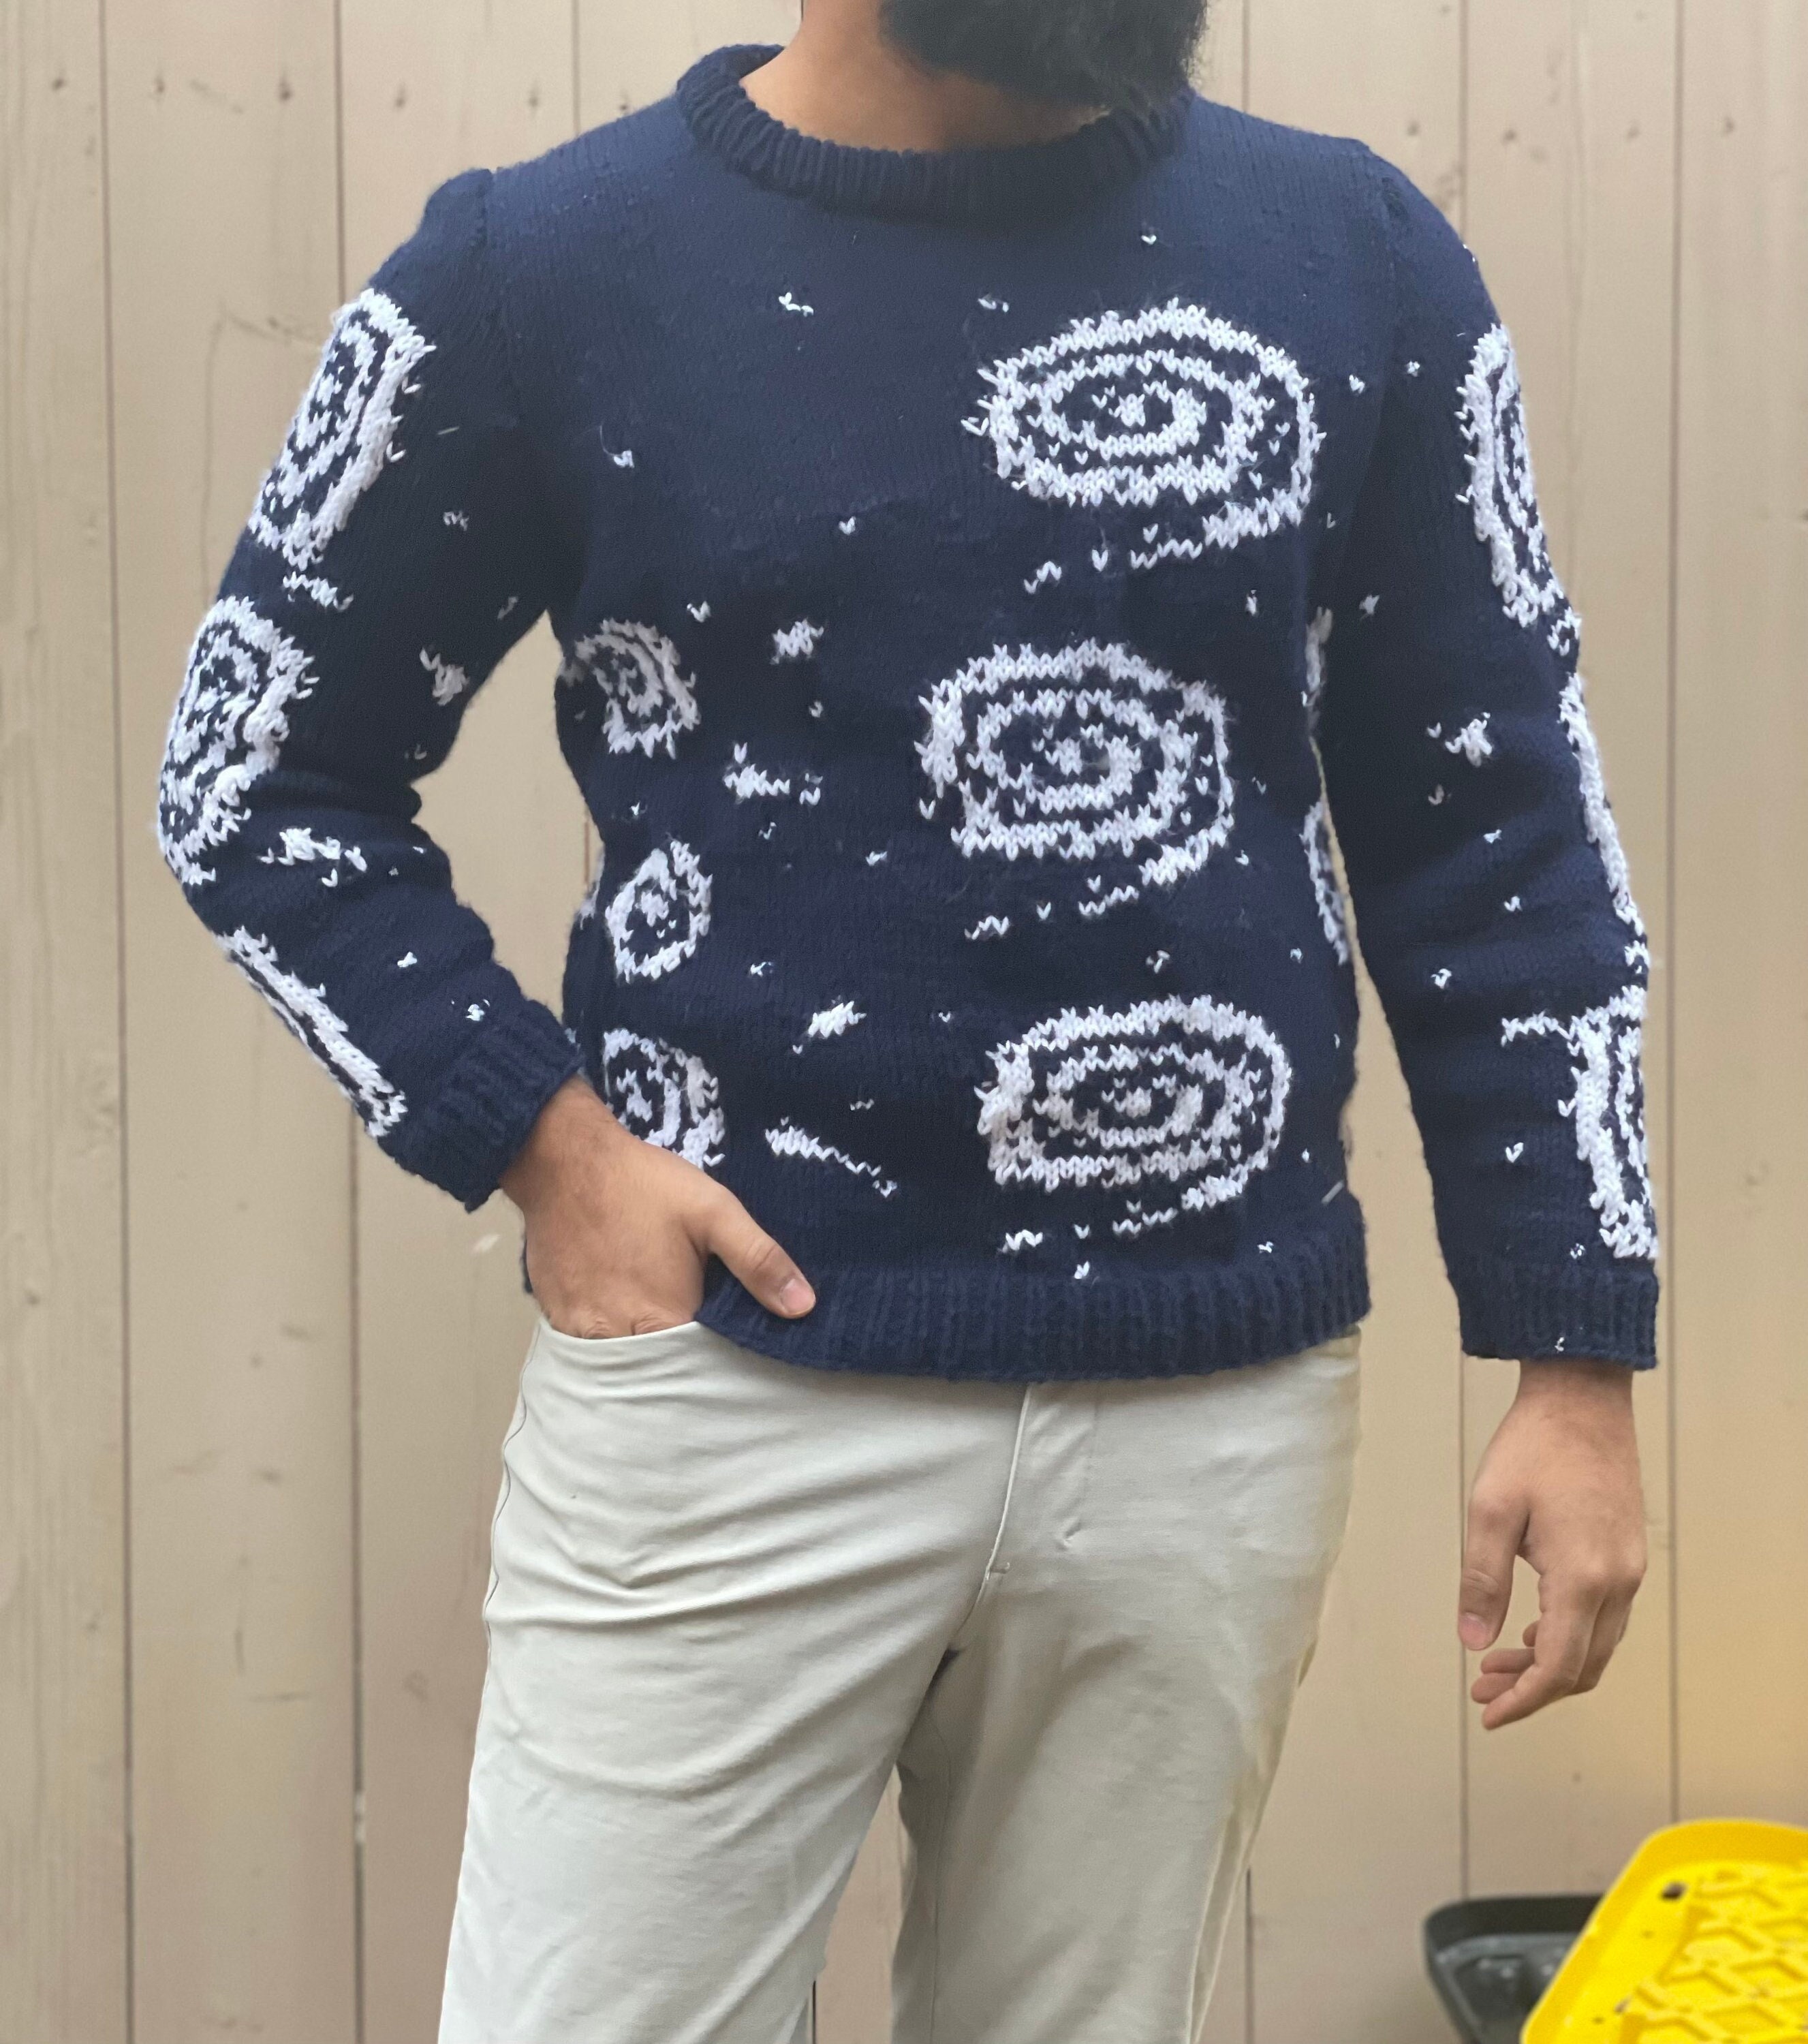 Hand Knitted Galaxy Sweater Eternal Sunshine of the Spotless Mind Movie  Inspired Blue White Customization & Personalization Available - Etsy